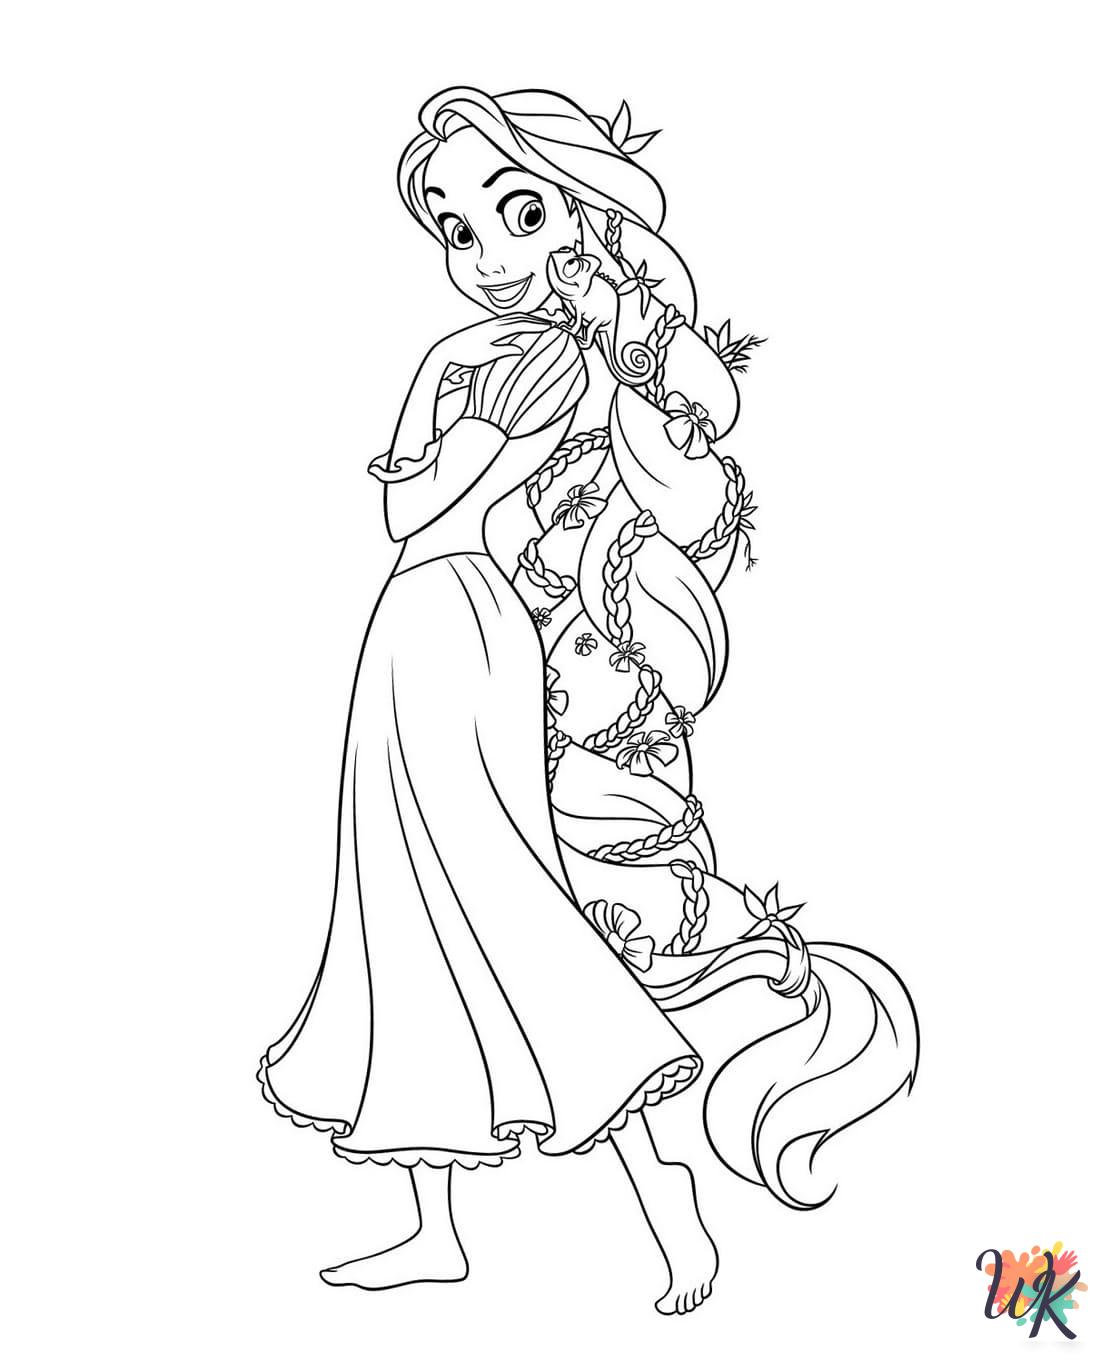 Tangled coloring pages free printable